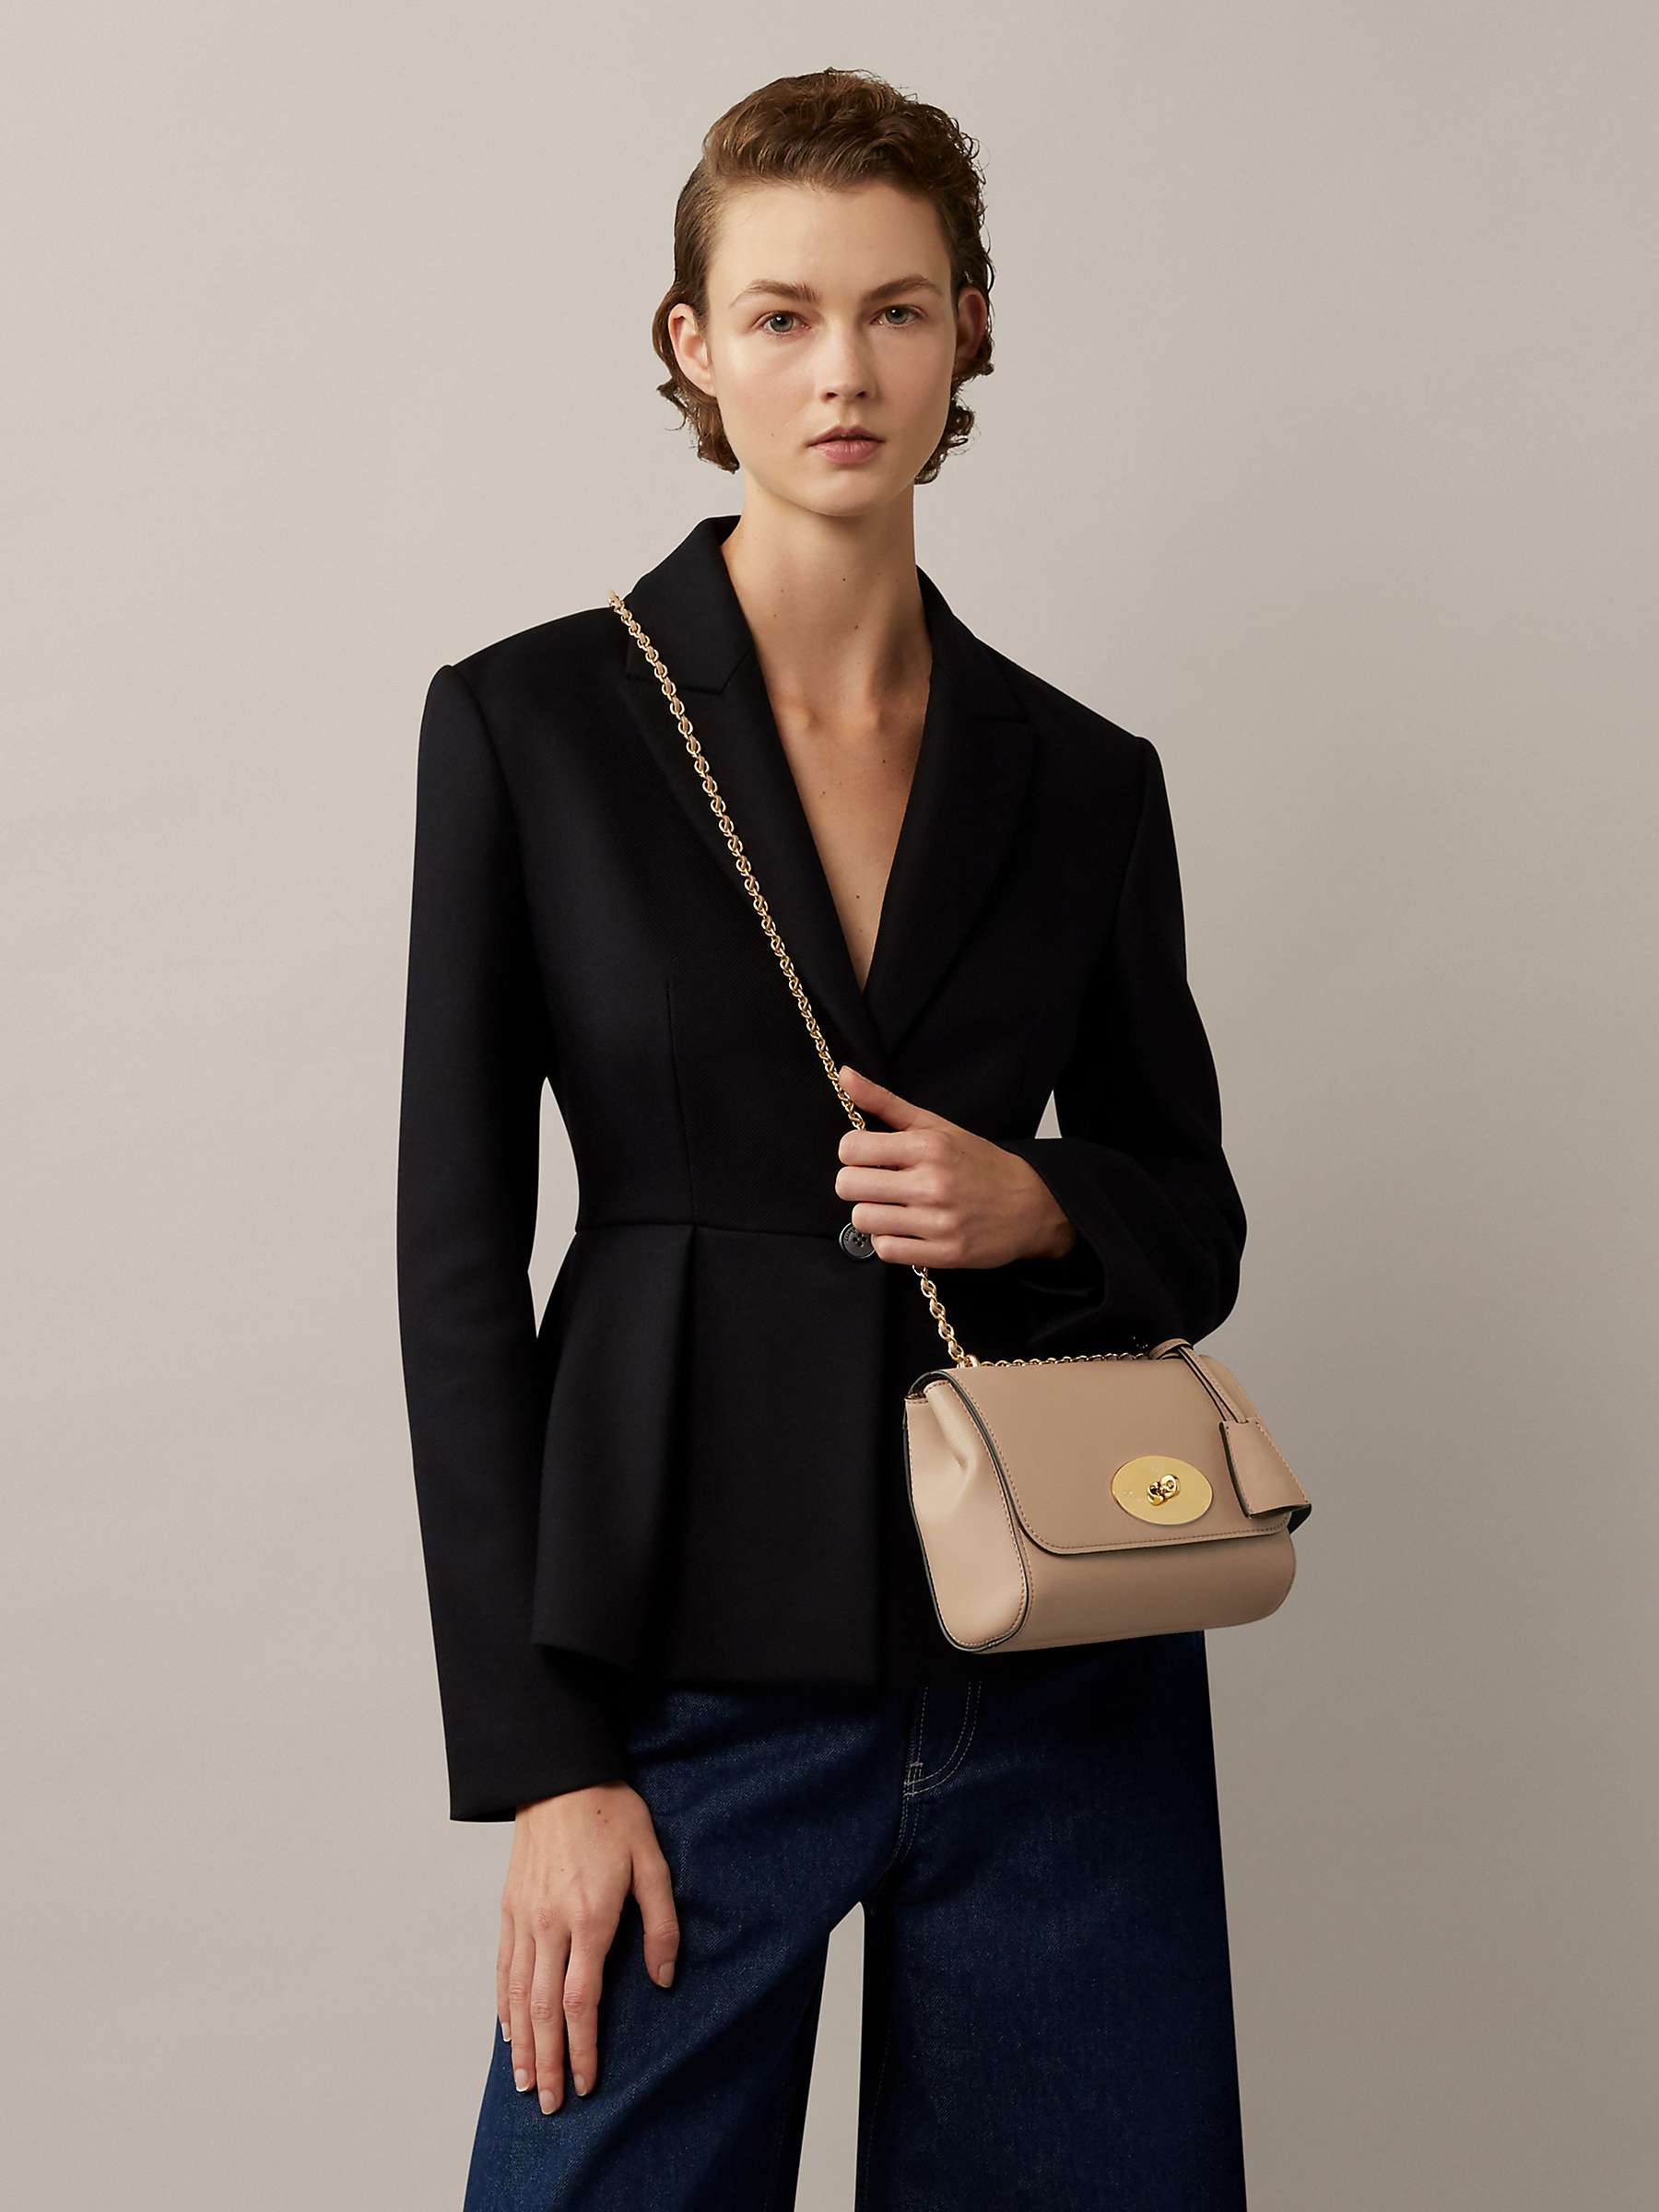 Buy Mulberry Lily Silky Calf Leather Shoulder Bag, Maple Online at johnlewis.com